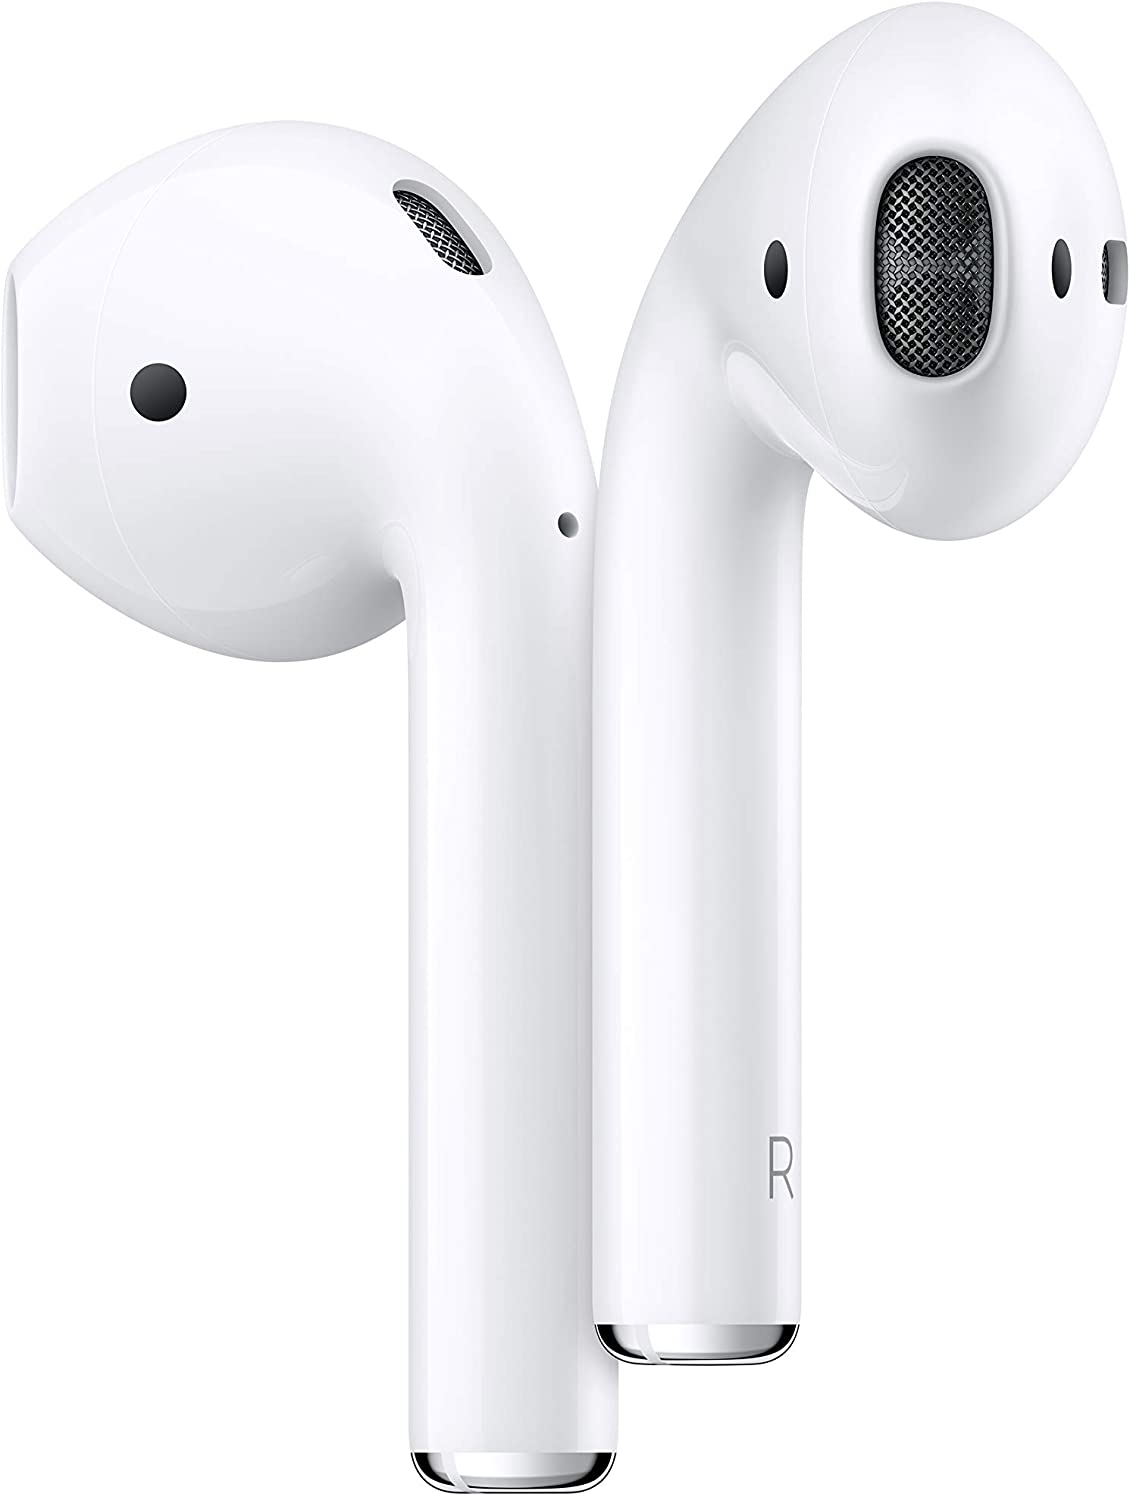 Airpods second generation. 